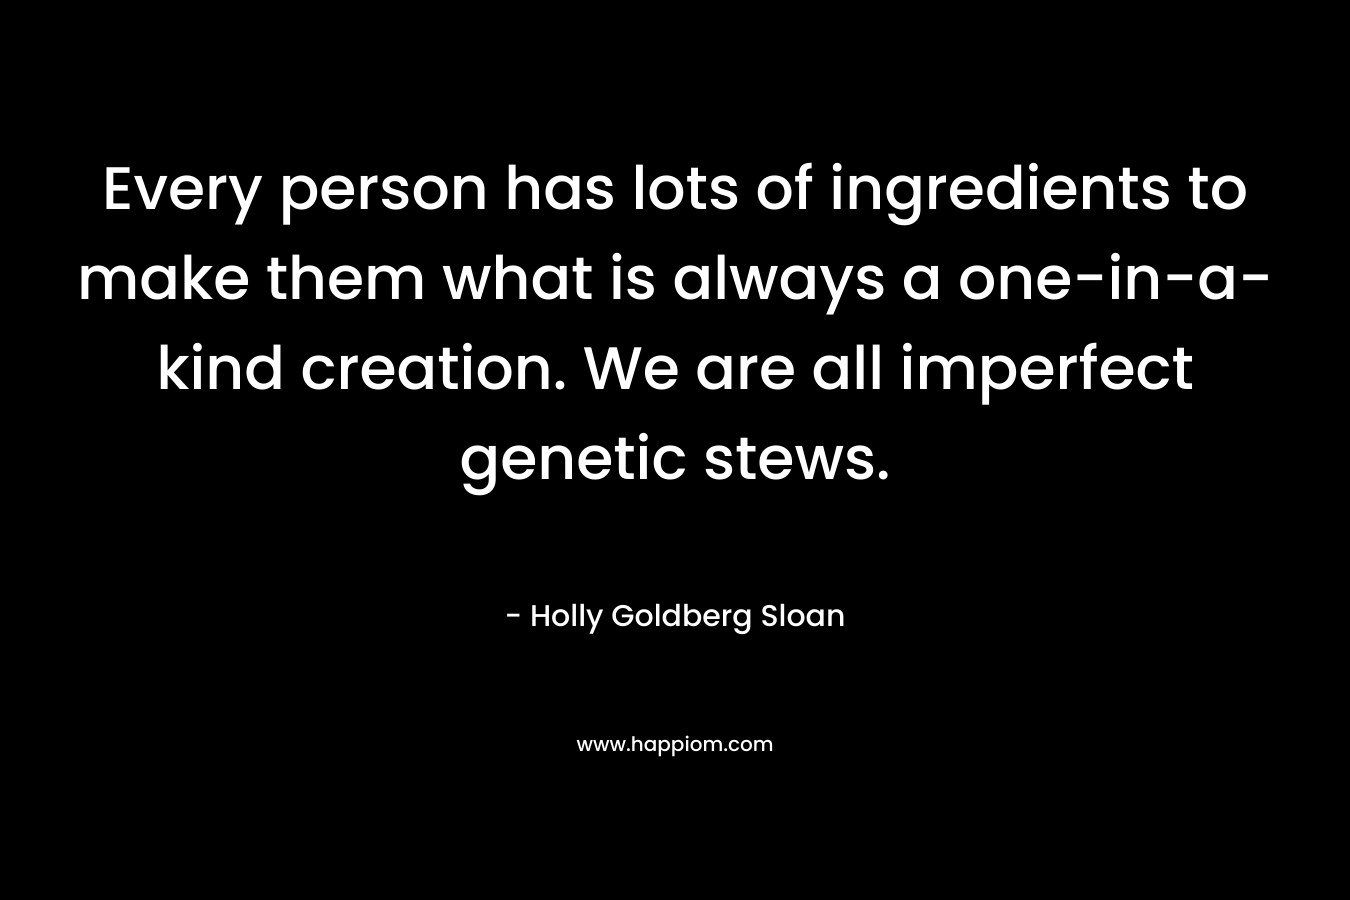 Every person has lots of ingredients to make them what is always a one-in-a-kind creation. We are all imperfect genetic stews. – Holly Goldberg Sloan